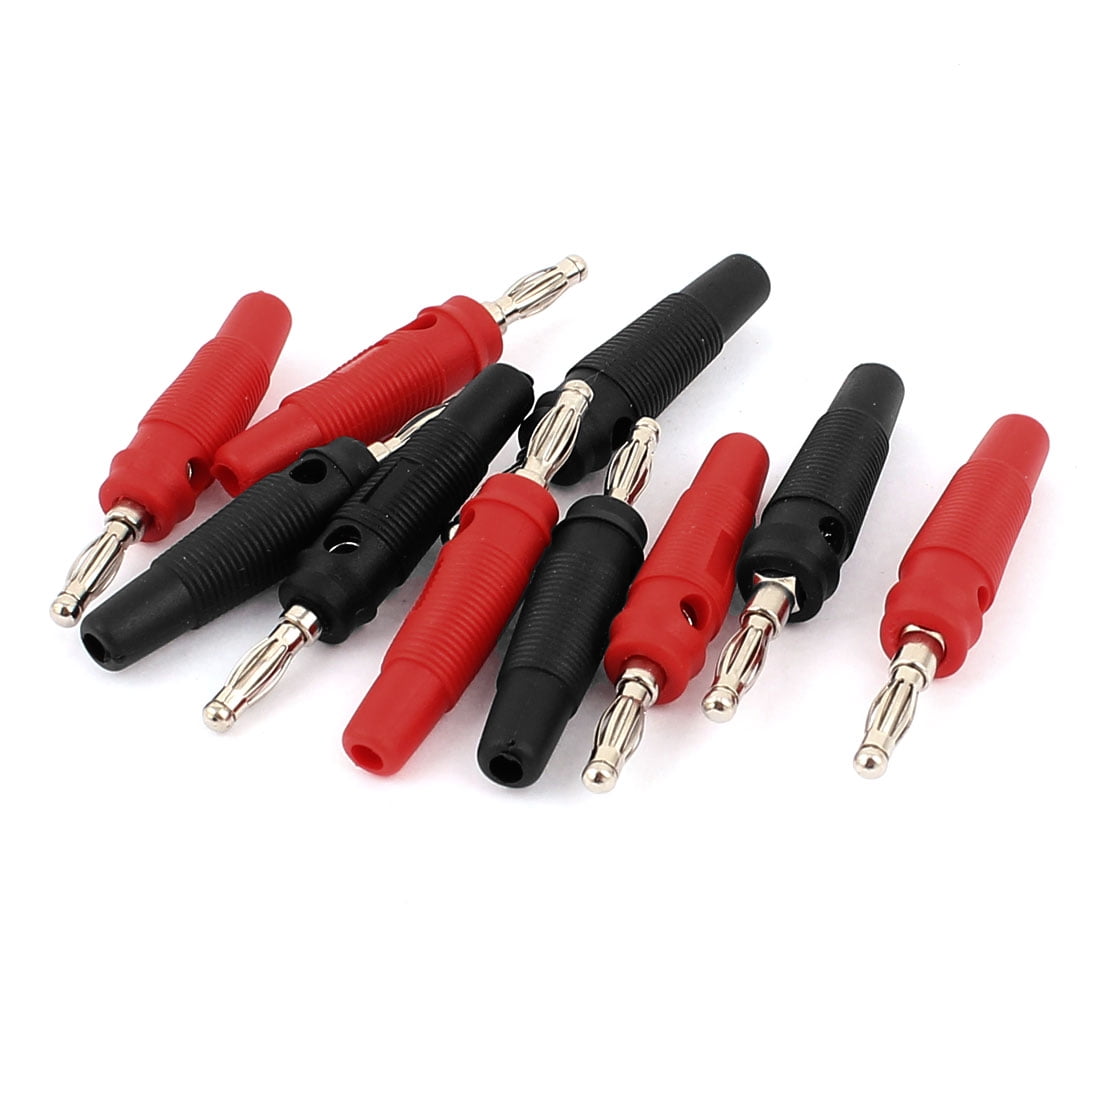 5 Black 4mm Banana Plugs Audio Speaker Connectors 38mm Red and 10pcs 5 